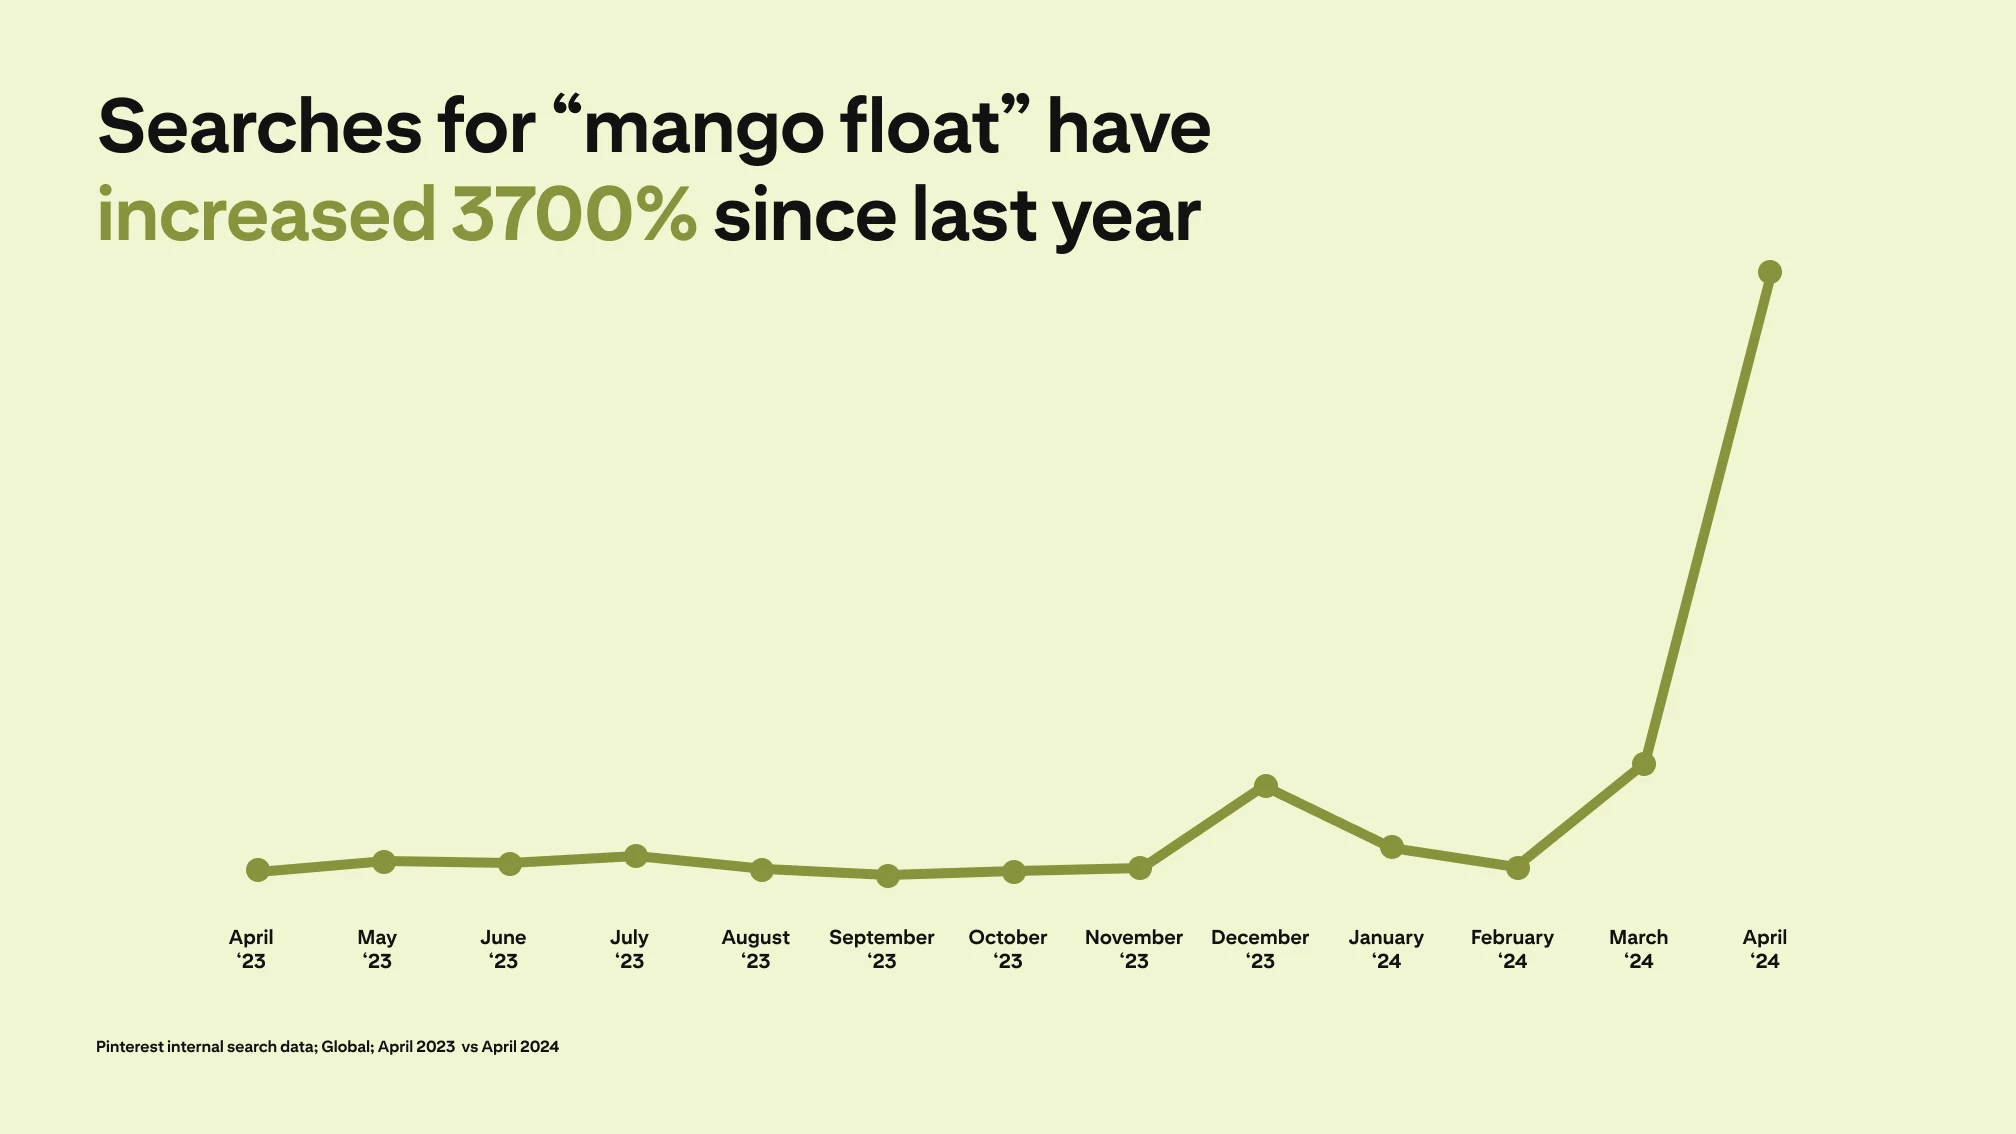 A line graph depicts searches for "mango float" increasing 3700% since last year